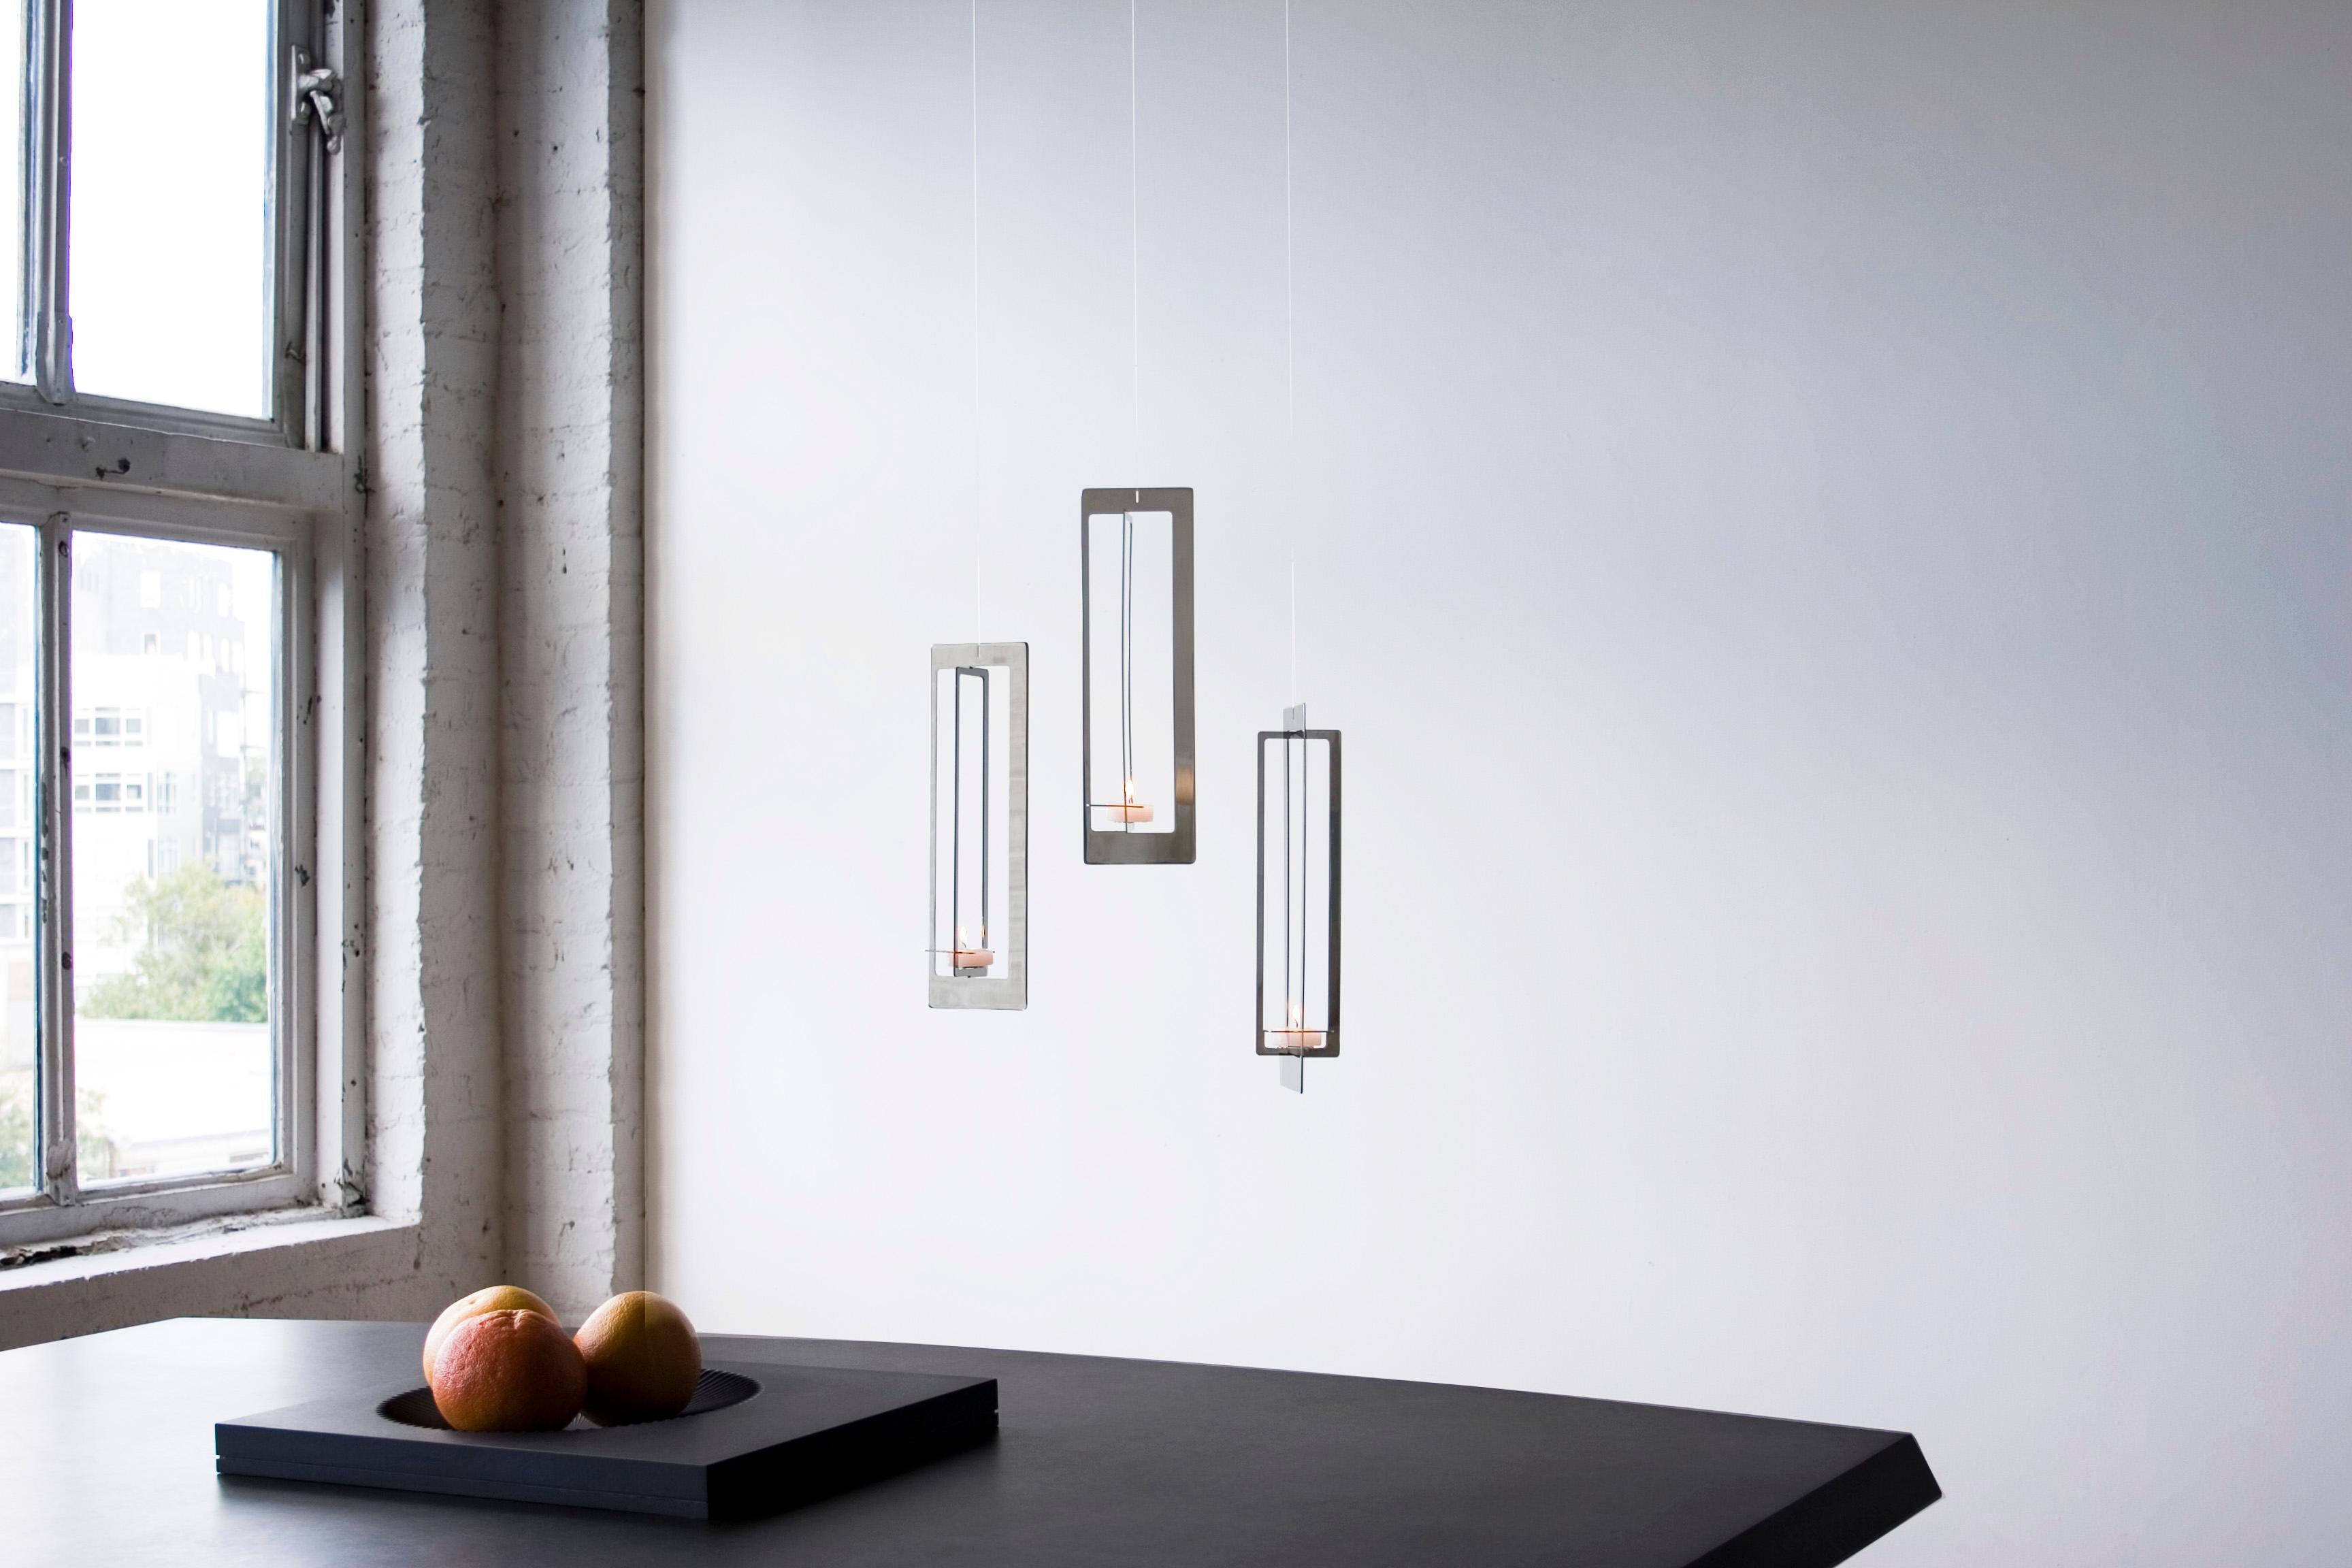 With attention to every edge and surface, we crafted a brushed stainless steel hanging candle holder with depth and vibrancy that reflects a candle’s glow in strips and slivers. Conceived as the contemporary charms of a design-it-yourself